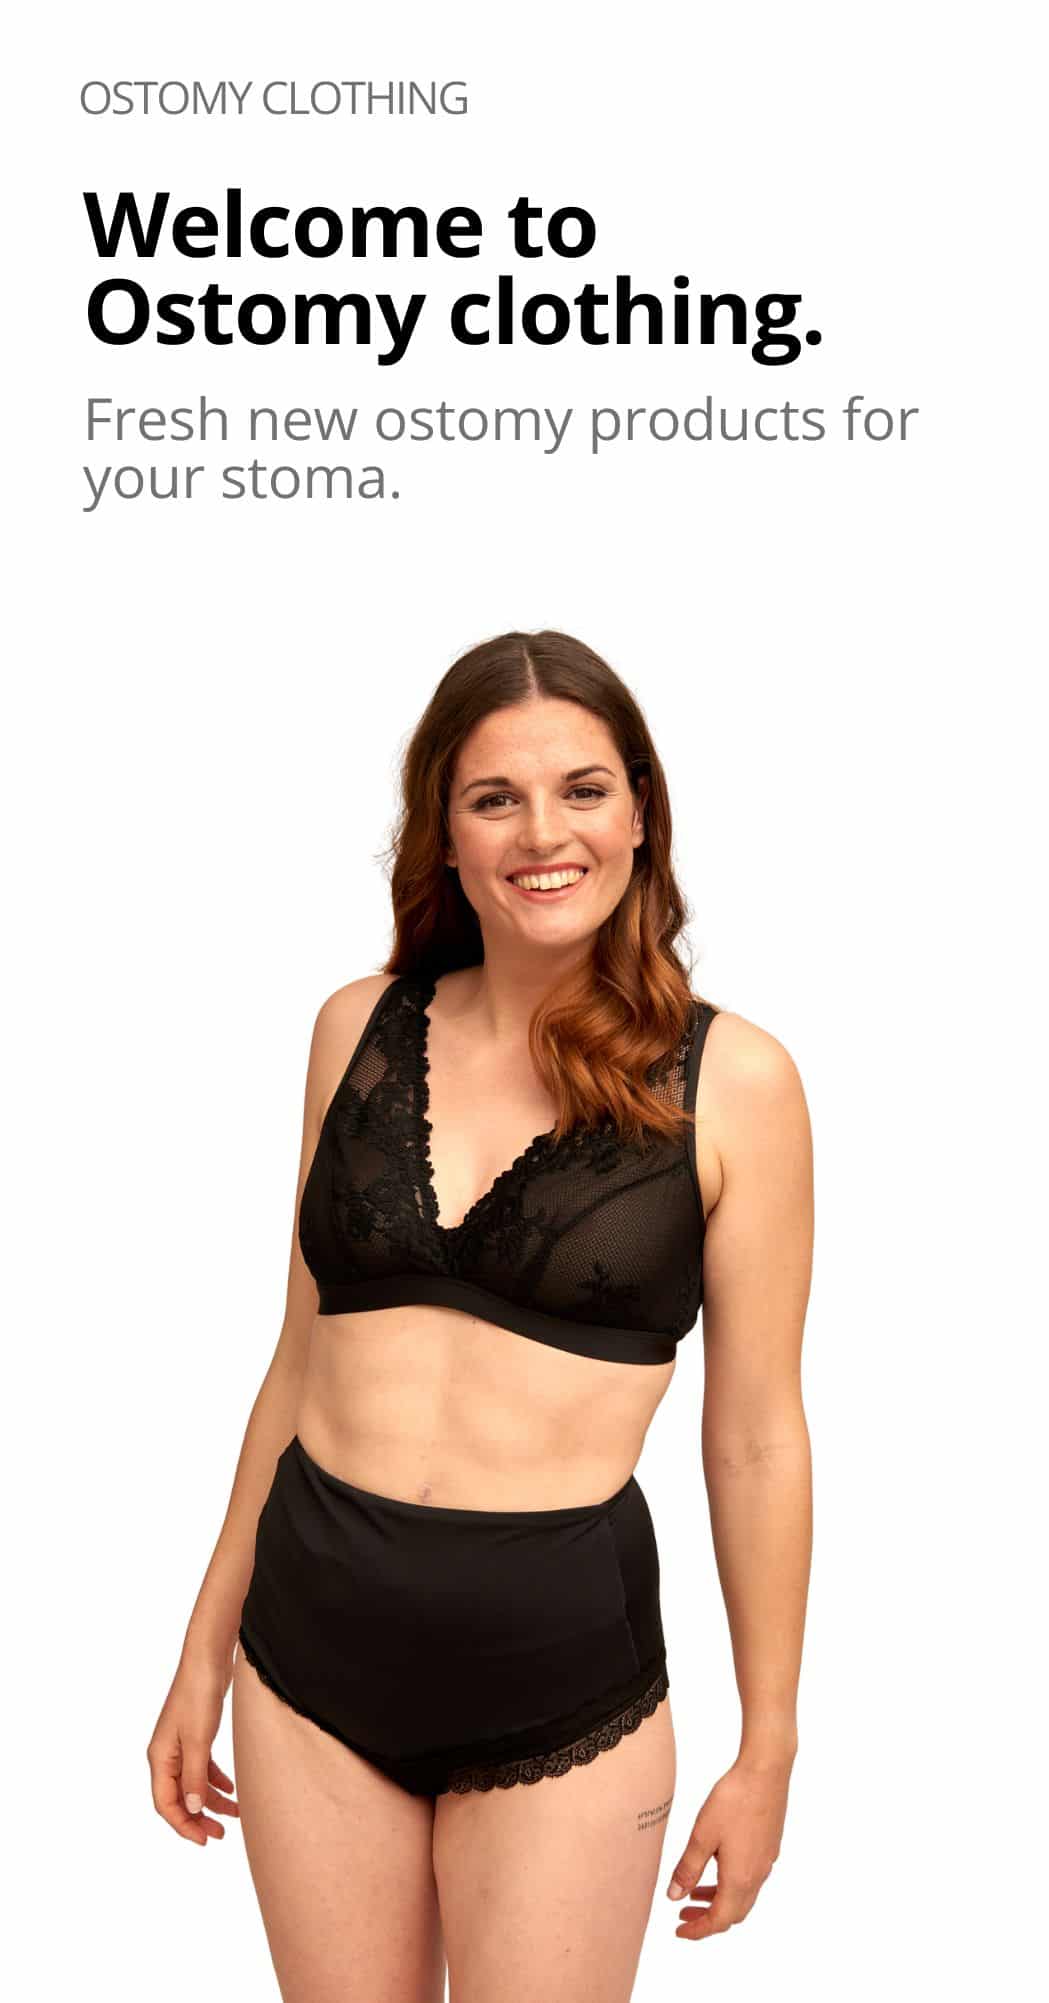 This silk sports bra keeps you supported while keeping a smooth appearance.  The stretchy fabric adapts to different body types. The simple design is  for added comfort and freedom of movement.